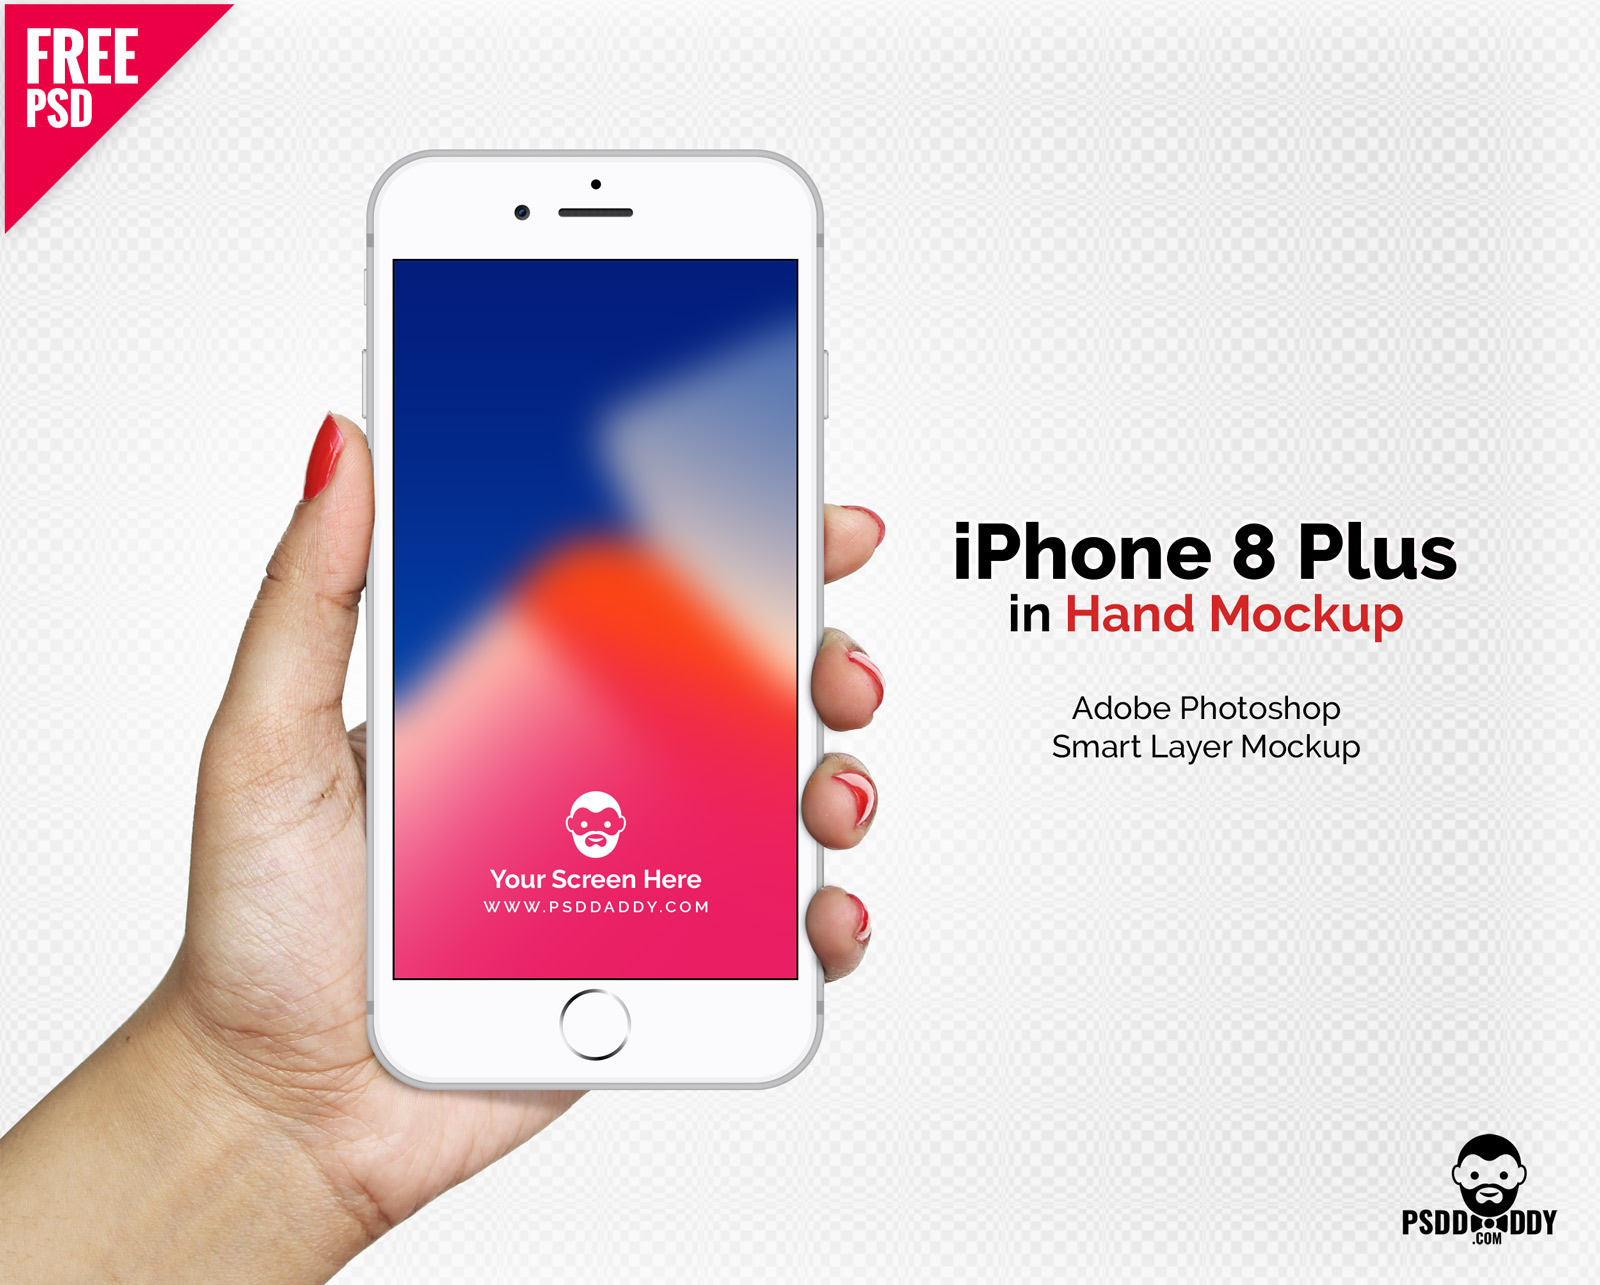 Download 30+ Awesome FREE PSD iPhone Mockups for Exclusive ...